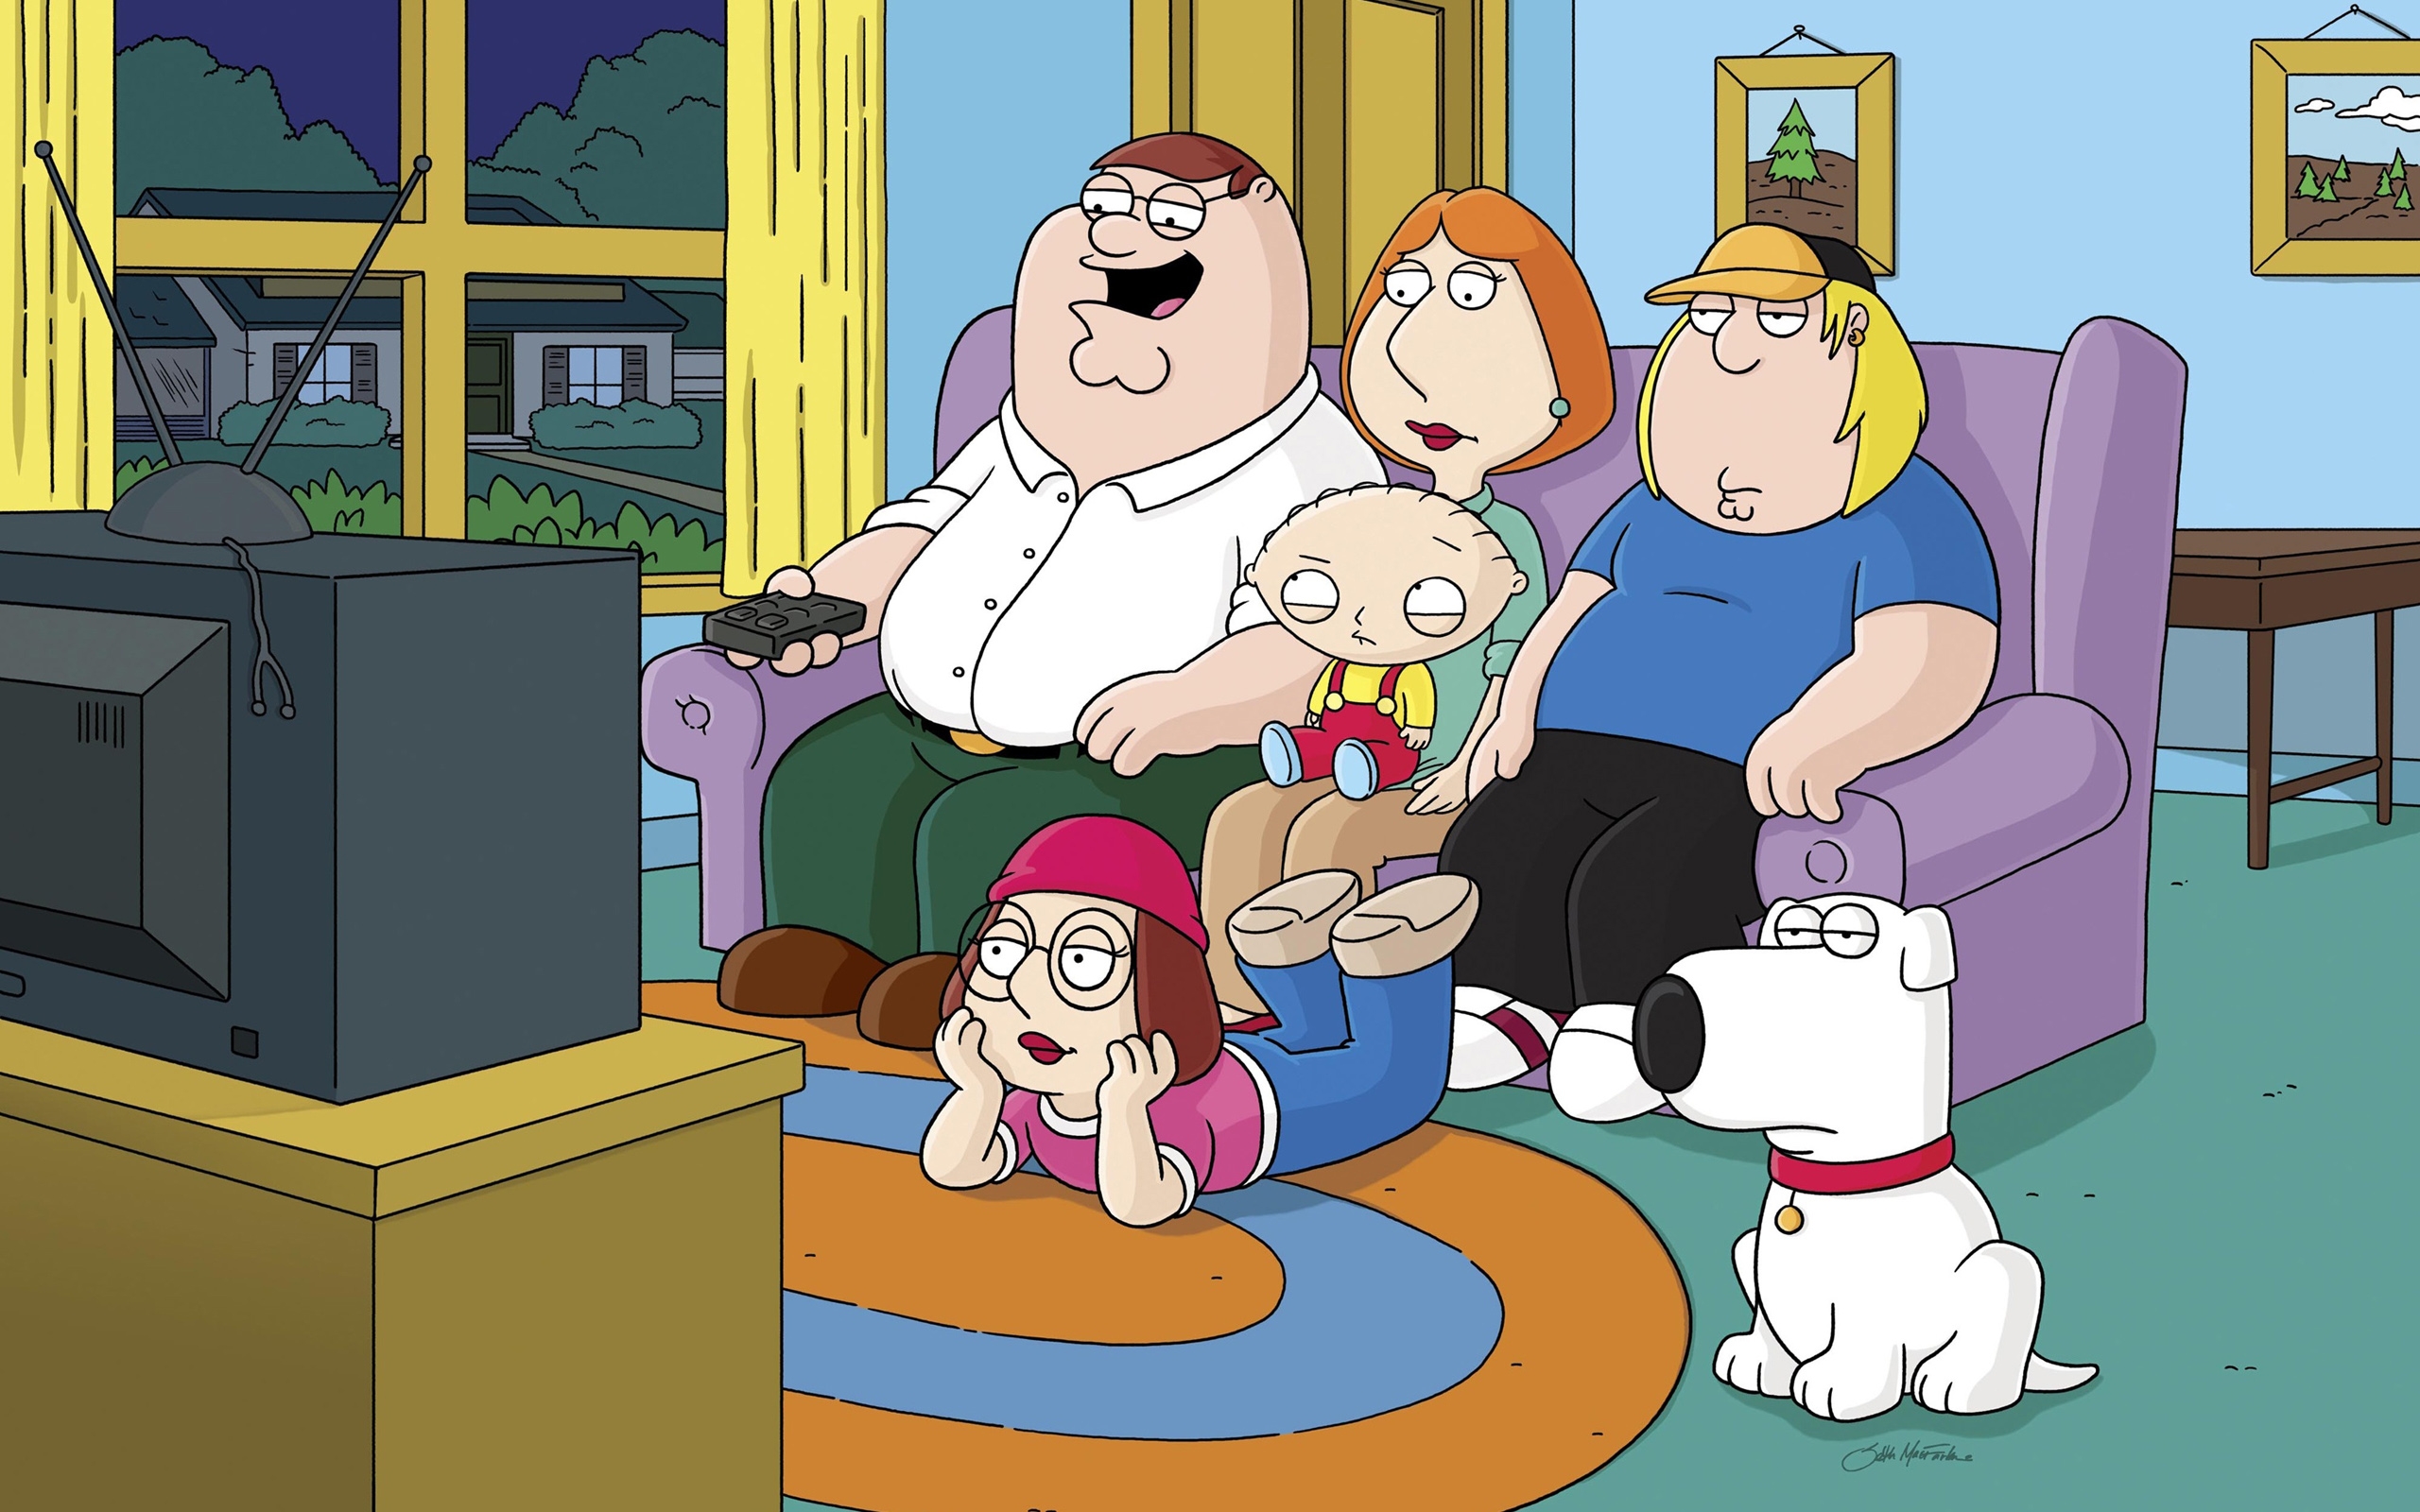 family guy, peter griffin, tv show, brian griffin, chris griffin, lois griffin, meg griffin, stewie griffin